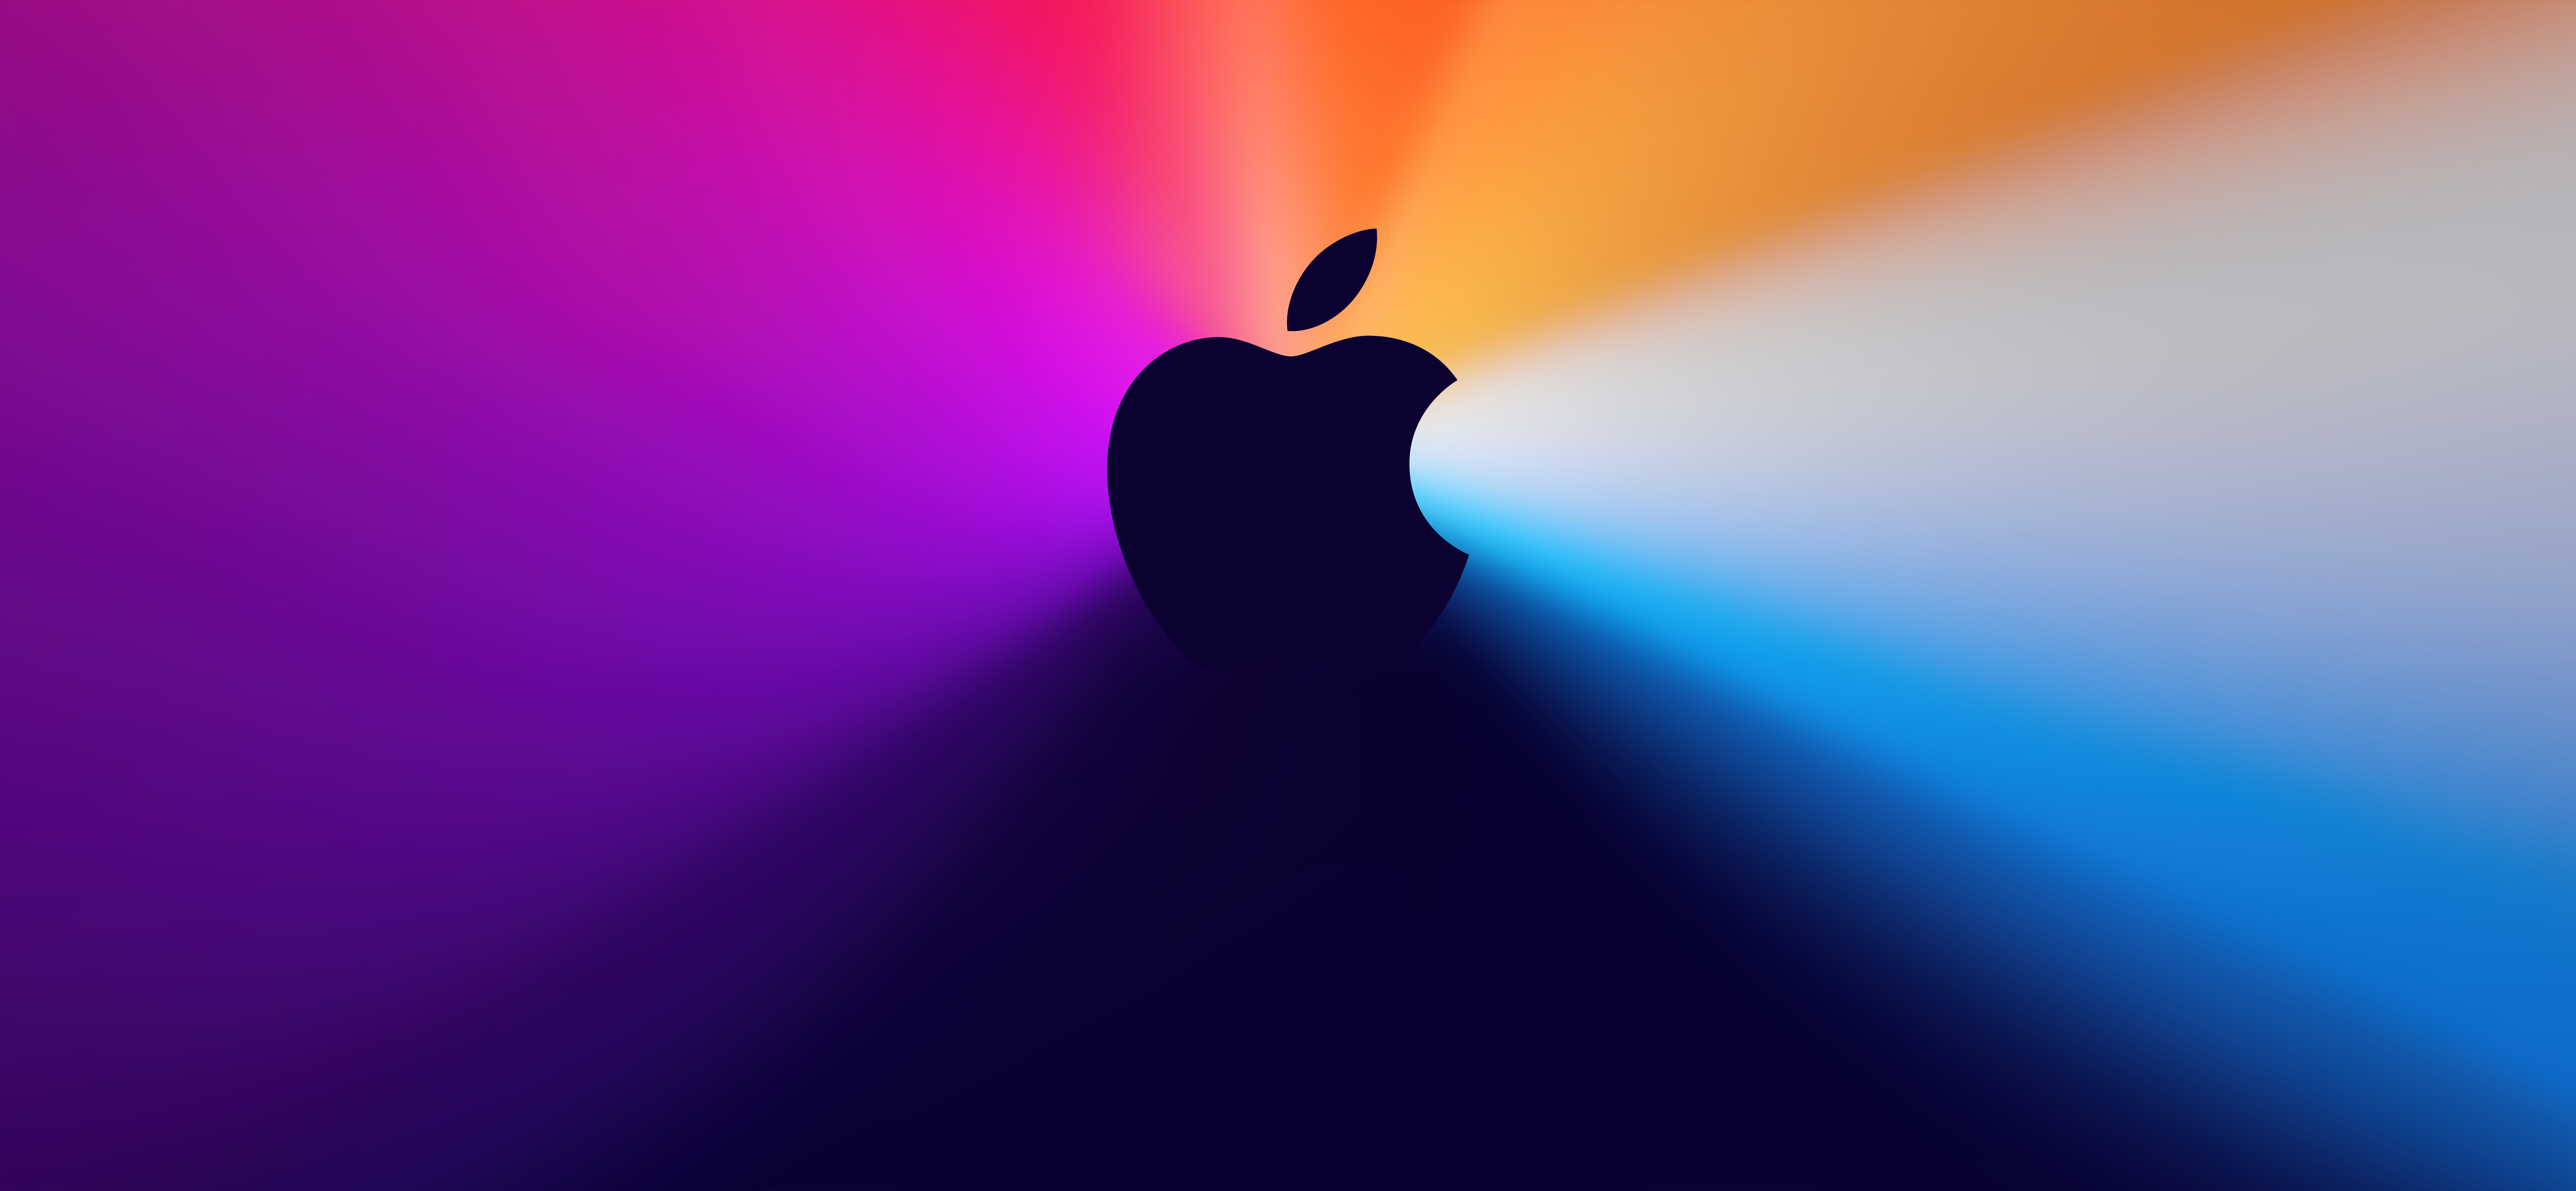 Wallpapers Central  Apple Event One More Thing Wallpaper by iSpazio  Download this wallpaper in HD Full Resolution from httpsifttt3eDd3n2   Facebook